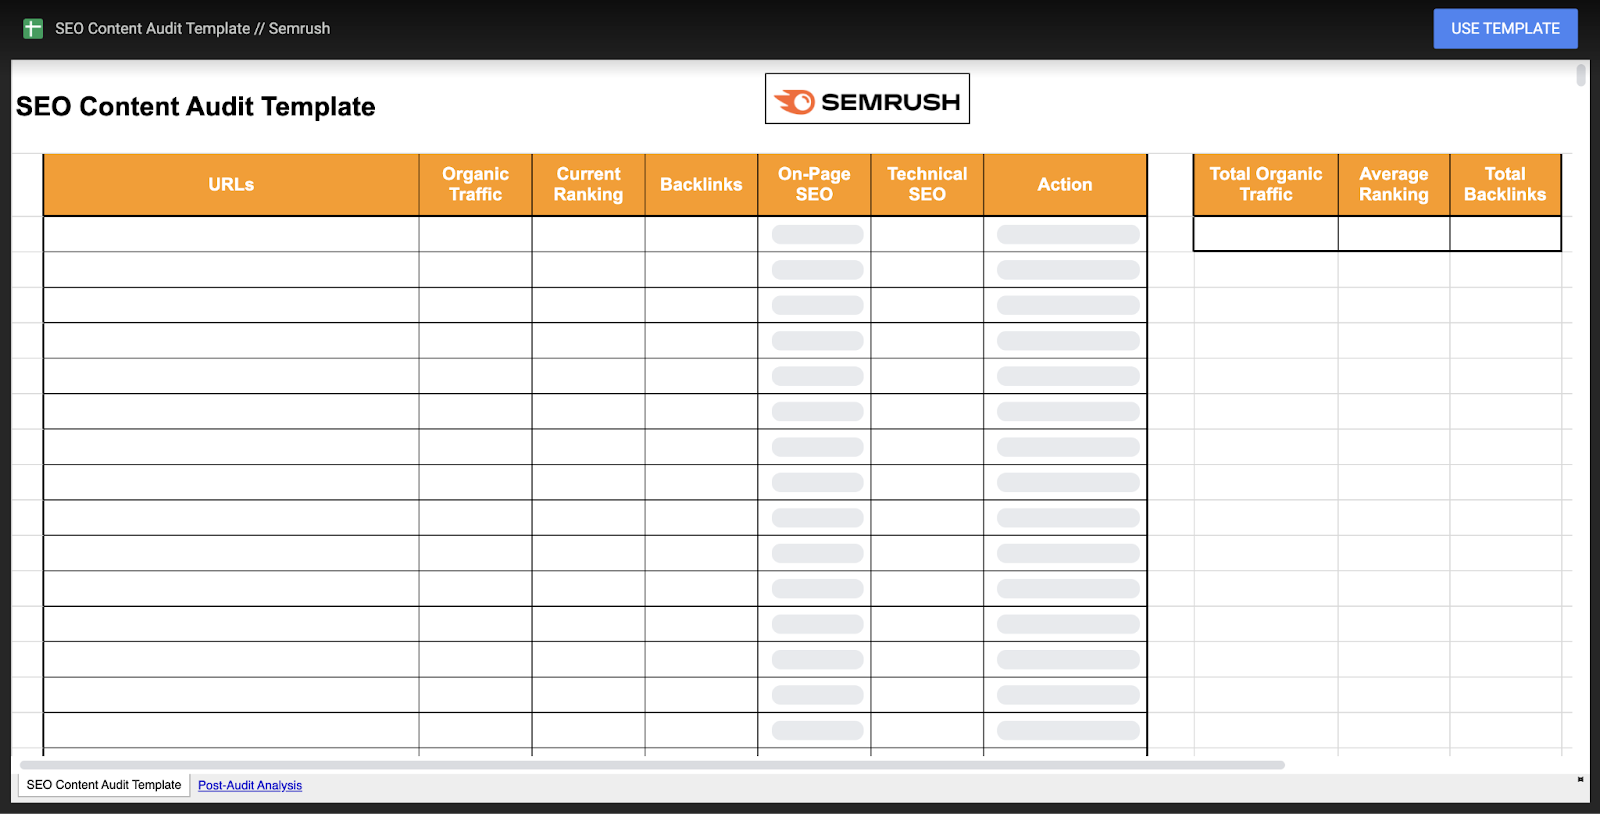 Semrush's SEO content audit template preview in Google Sheets